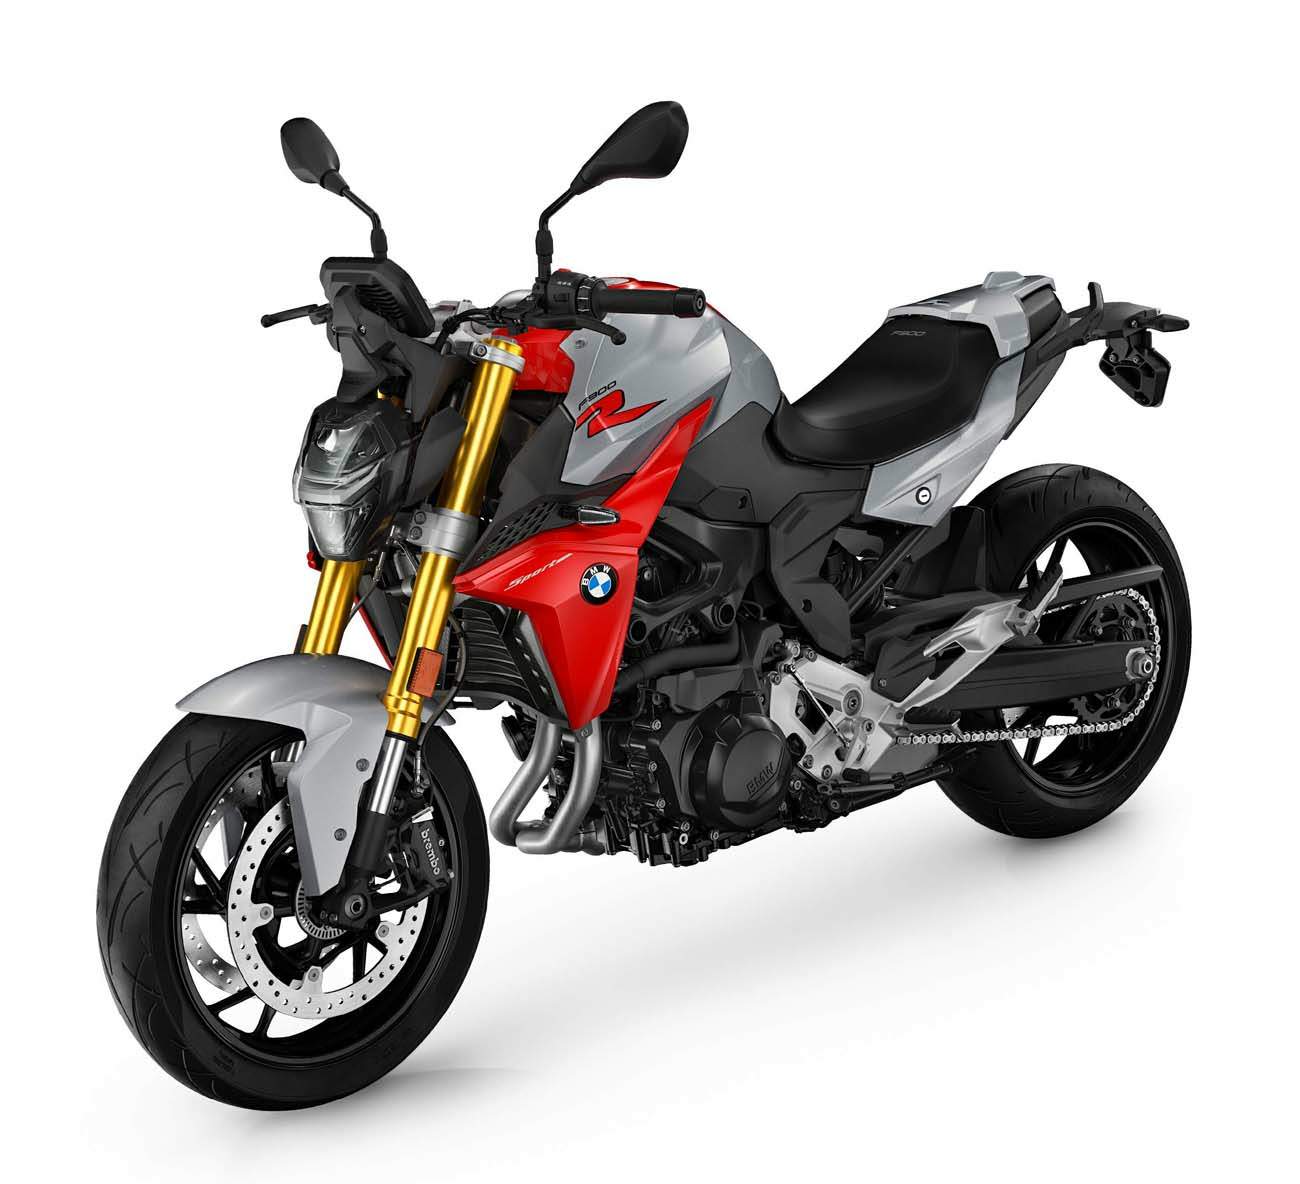 BMW F900R : Price, Images, Specs & Reviews 